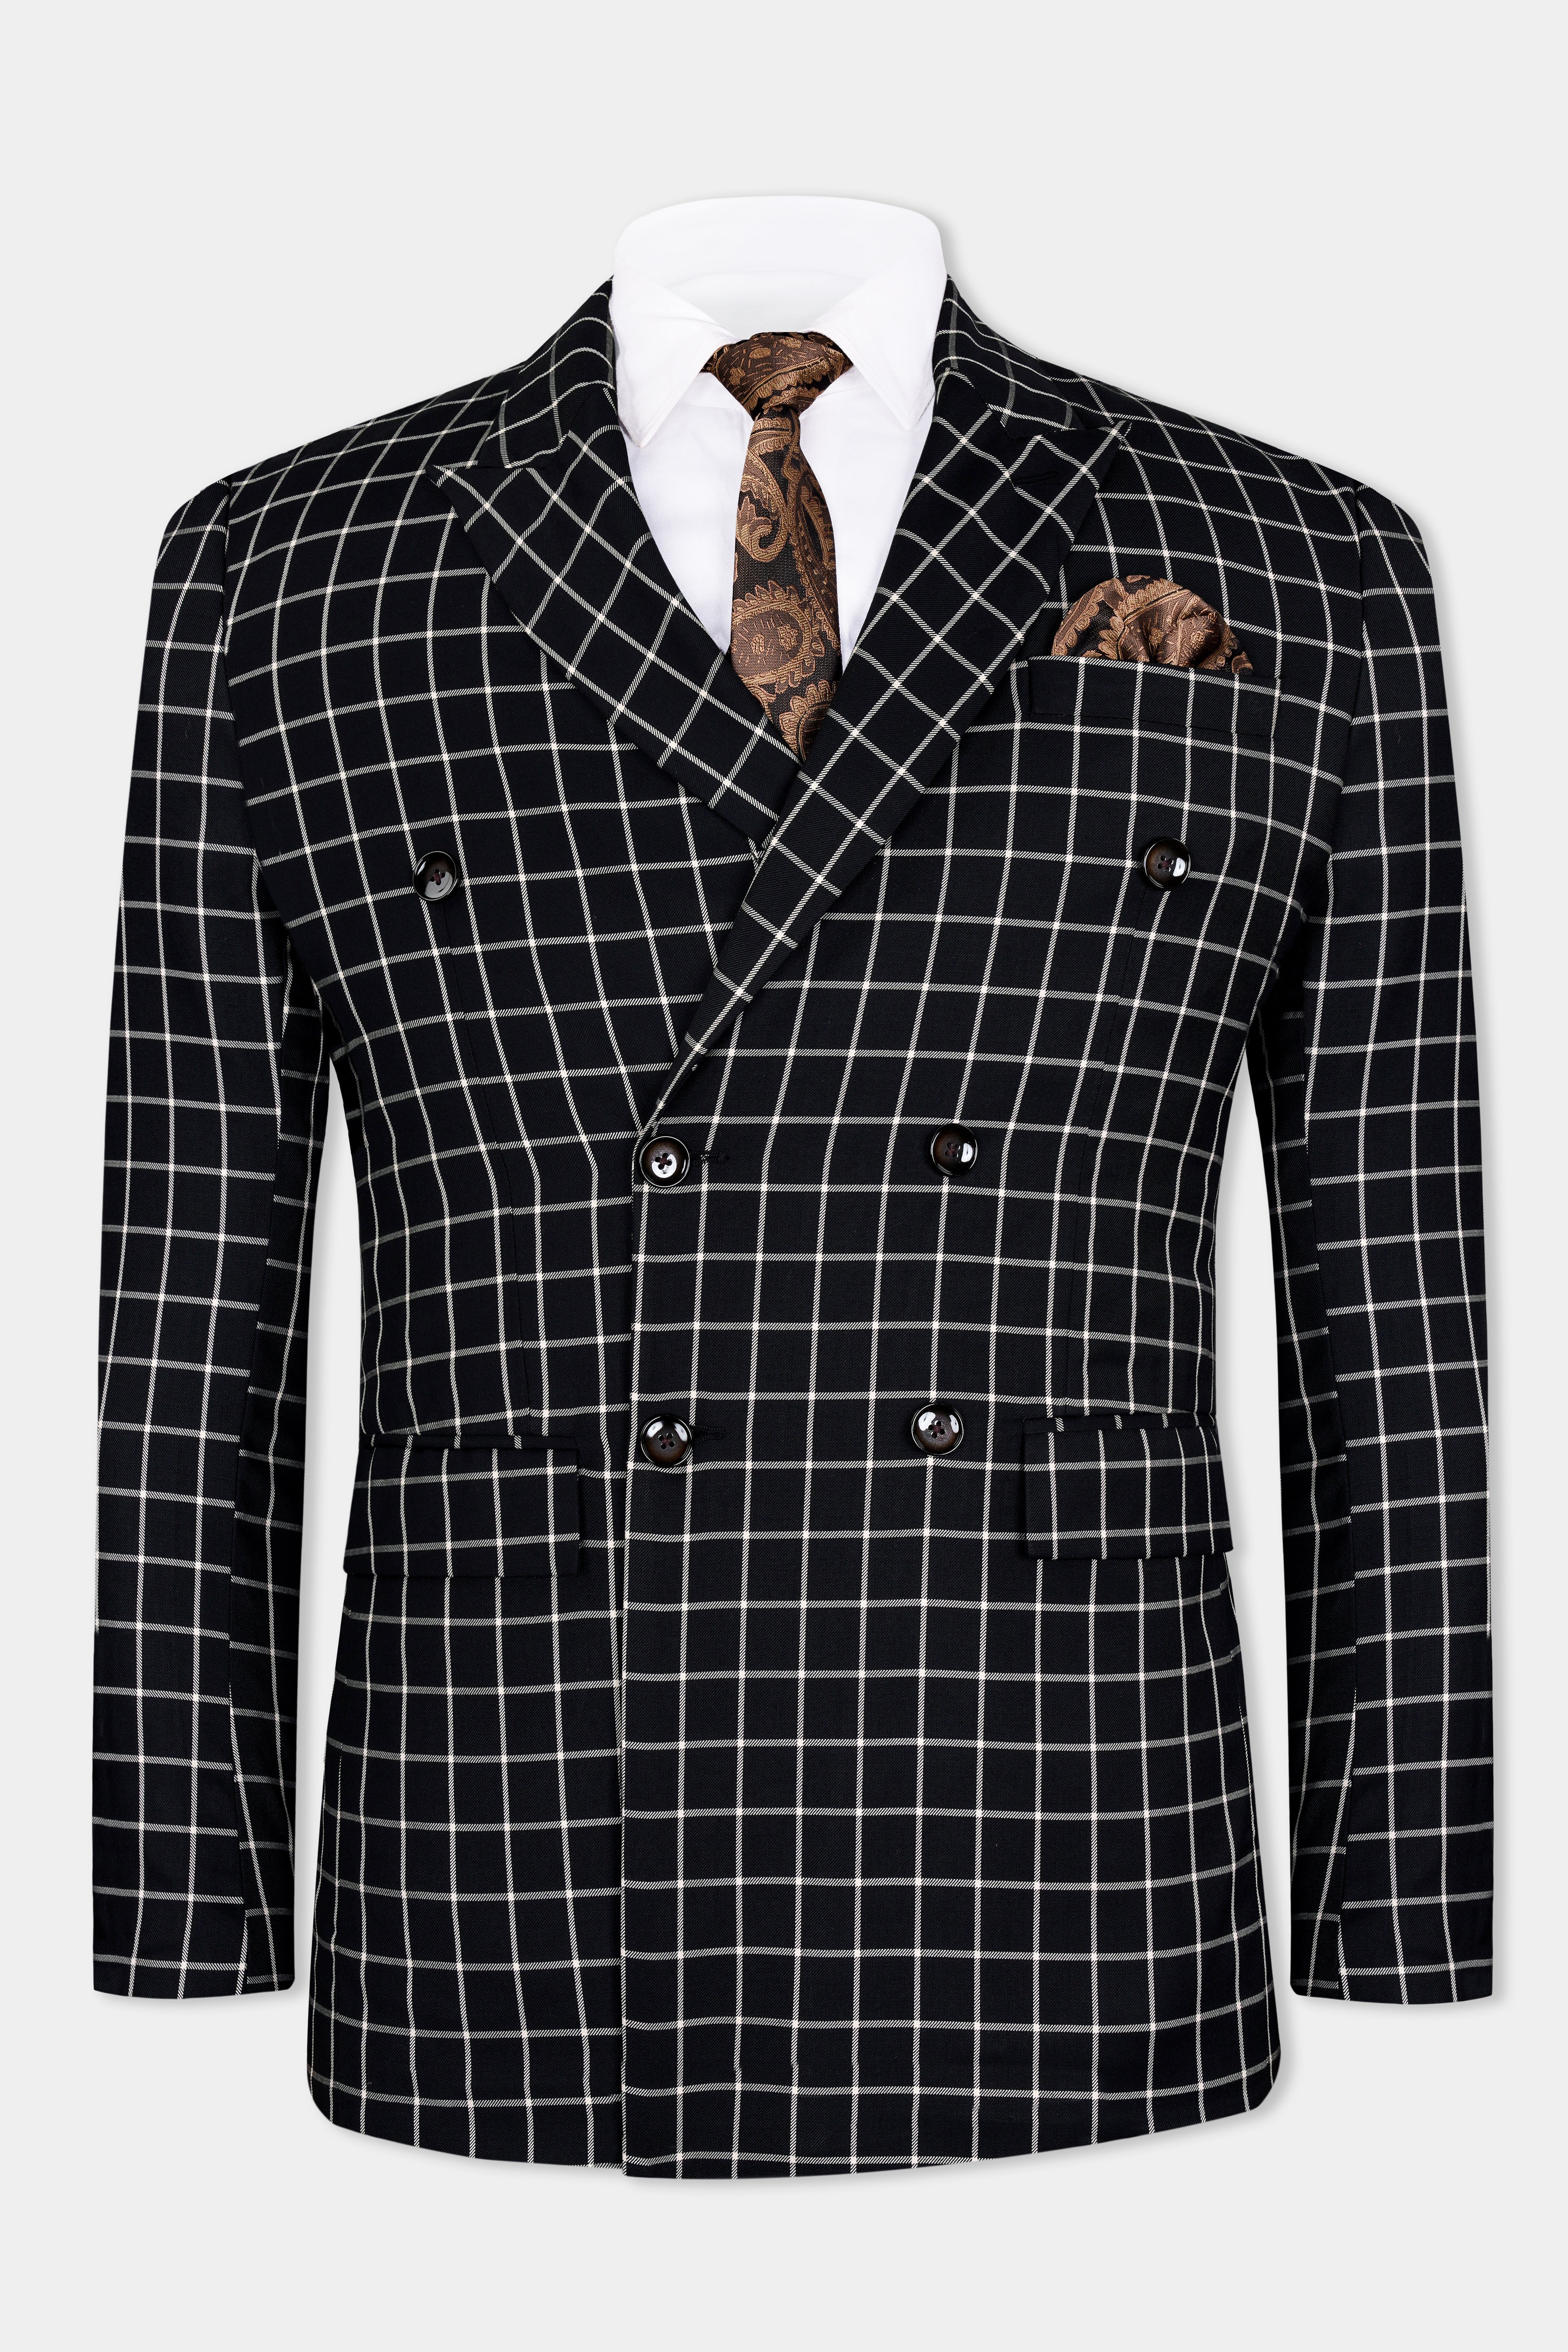 Jade Black and White Checkered Wool Rich Double Breasted Blazer BL2932-DB-36, BL2932-DB-38, BL2932-DB-40, BL2932-DB-42, BL2932-DB-44, BL2932-DB-46, BL2932-DB-48, BL2932-DB-50, BL2932-DB-52, BL2932-DB-54, BL2932-DB-56, BL2932-DB-58, BL2932-DB-60